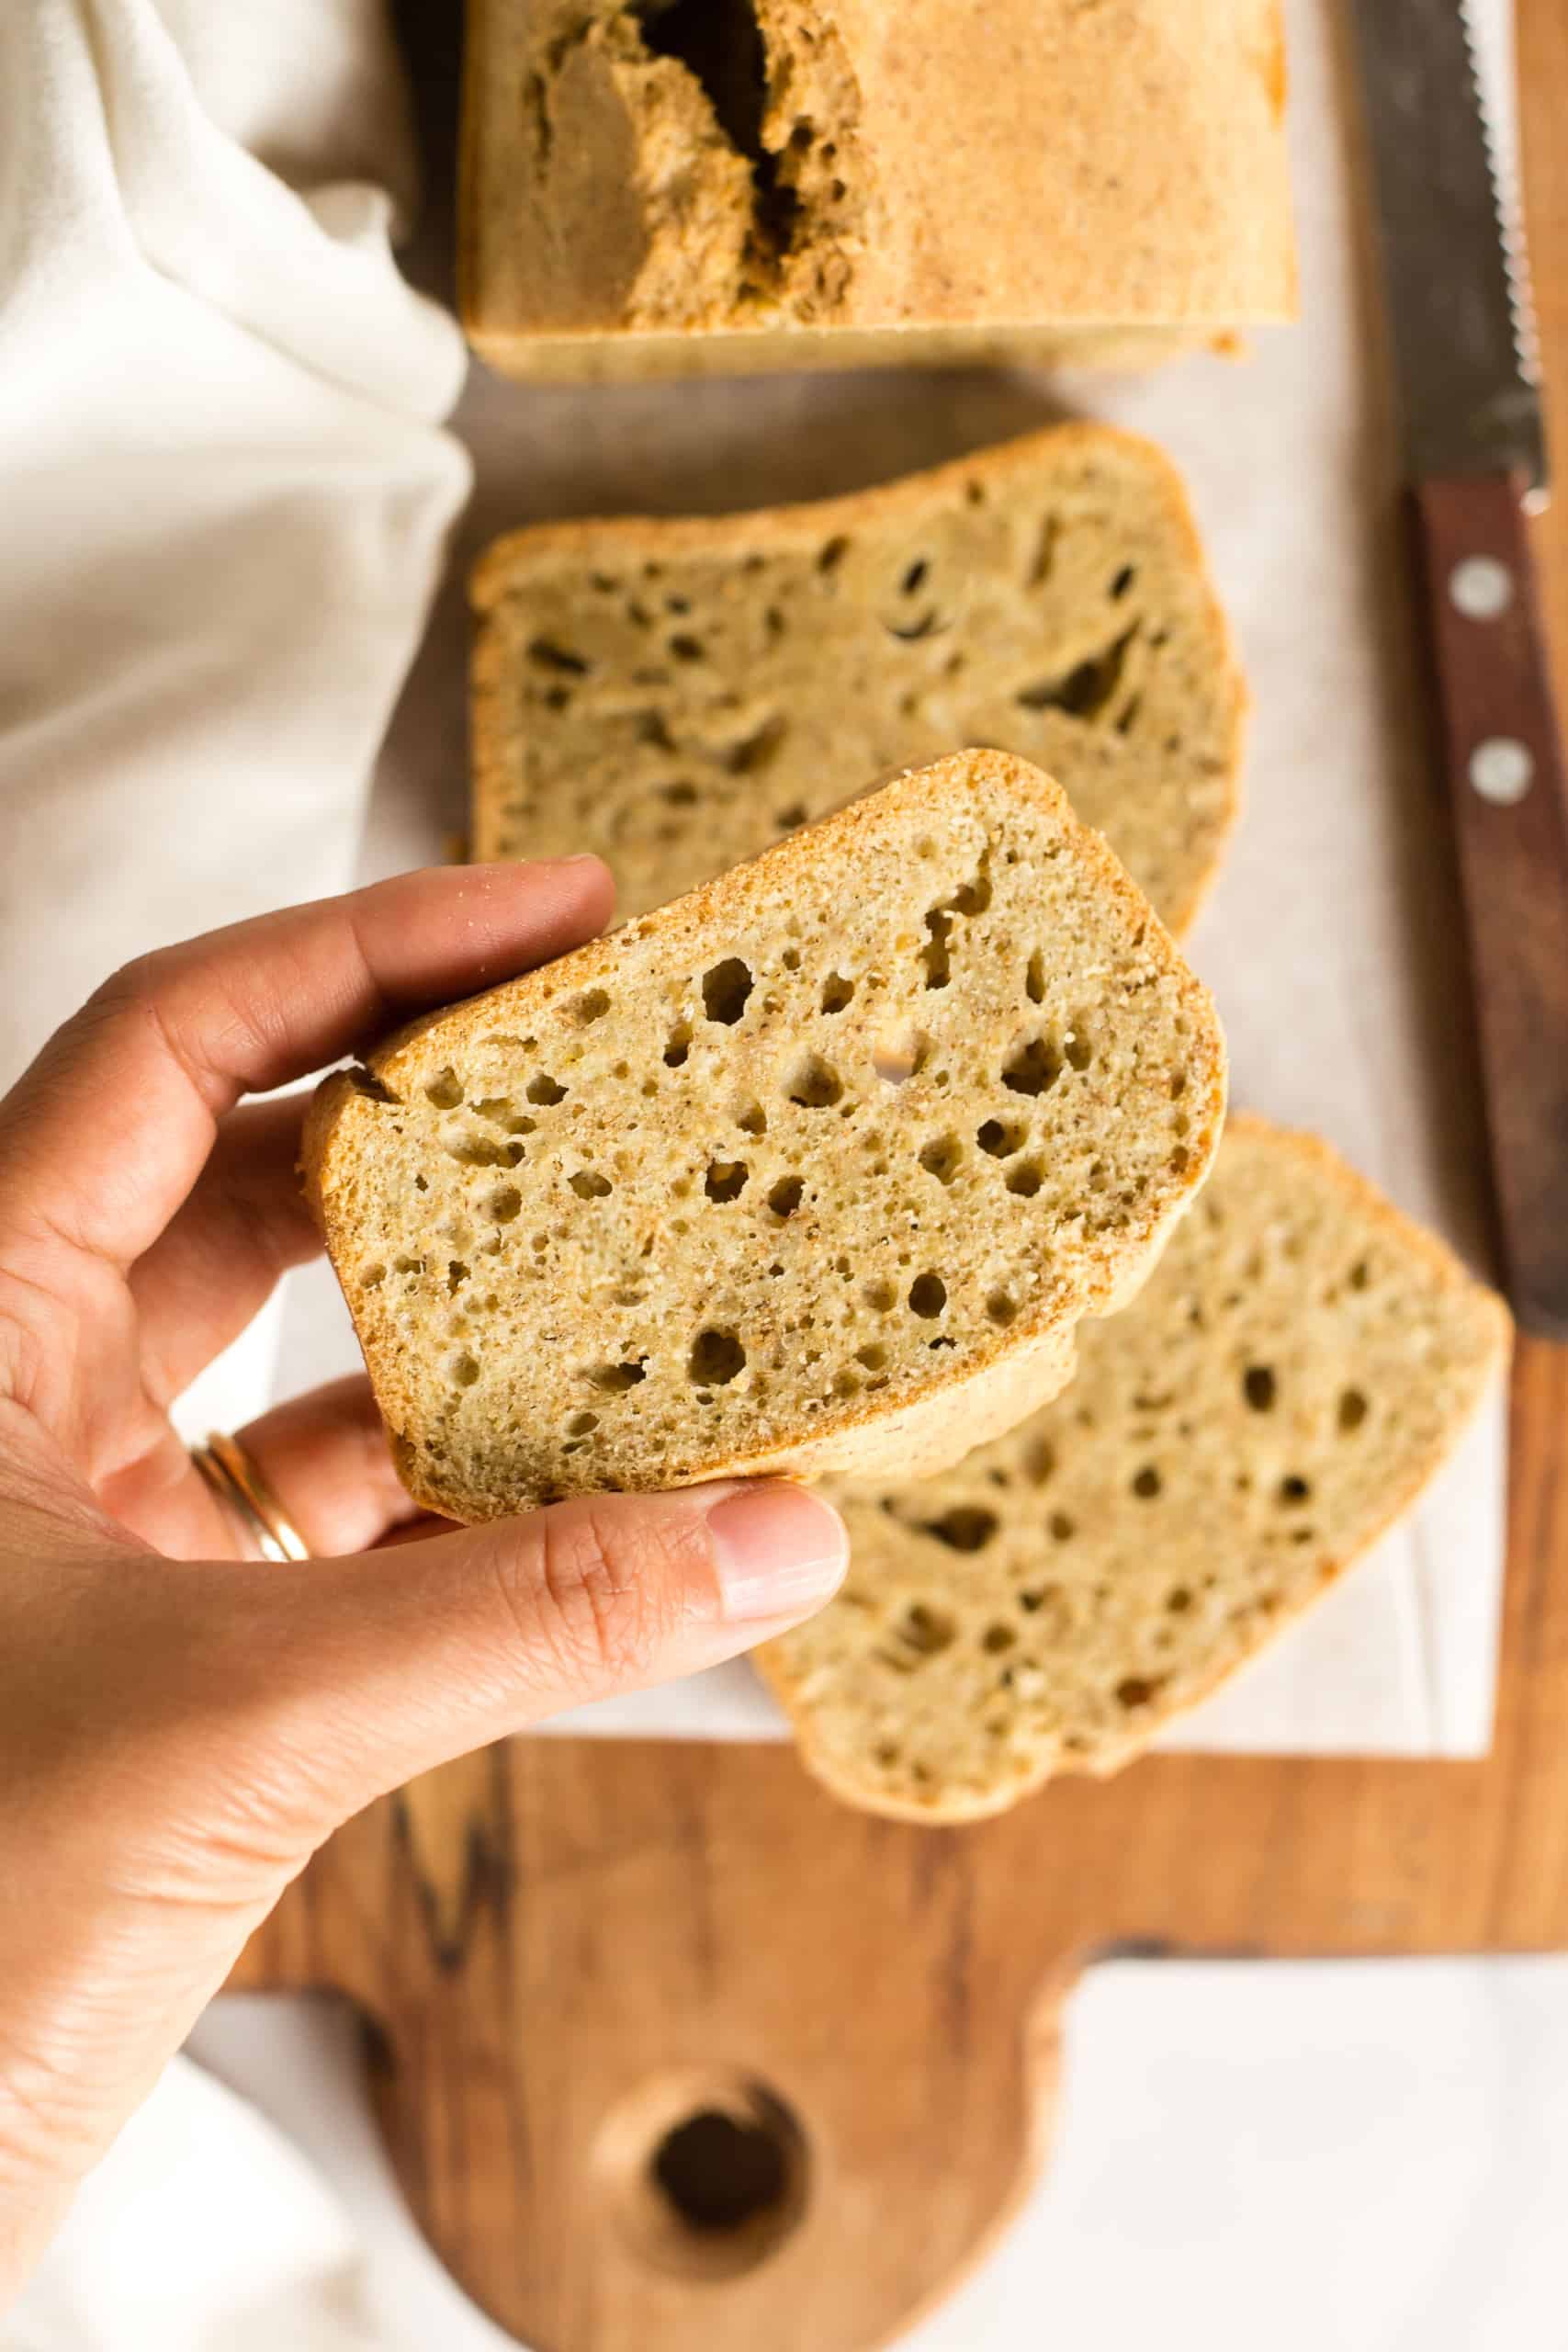 Hand holding up a slice of tiger nut flour bread.